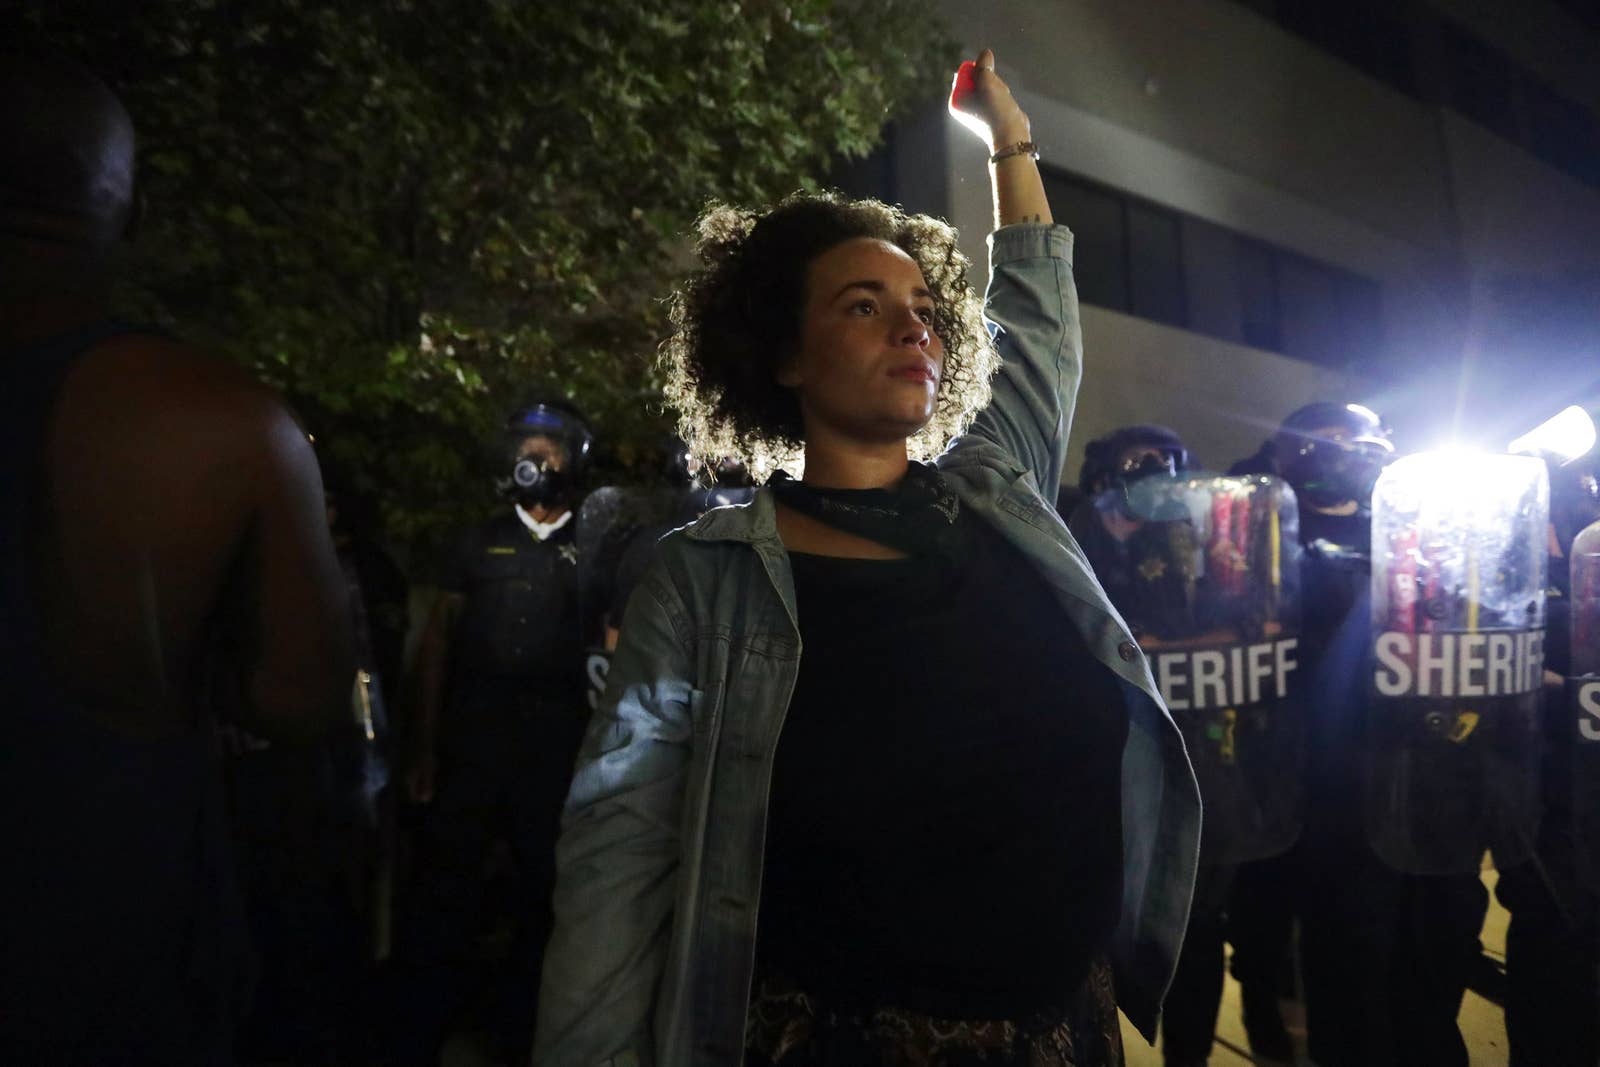 A woman holds her fist up in the air in front of a crowd of police